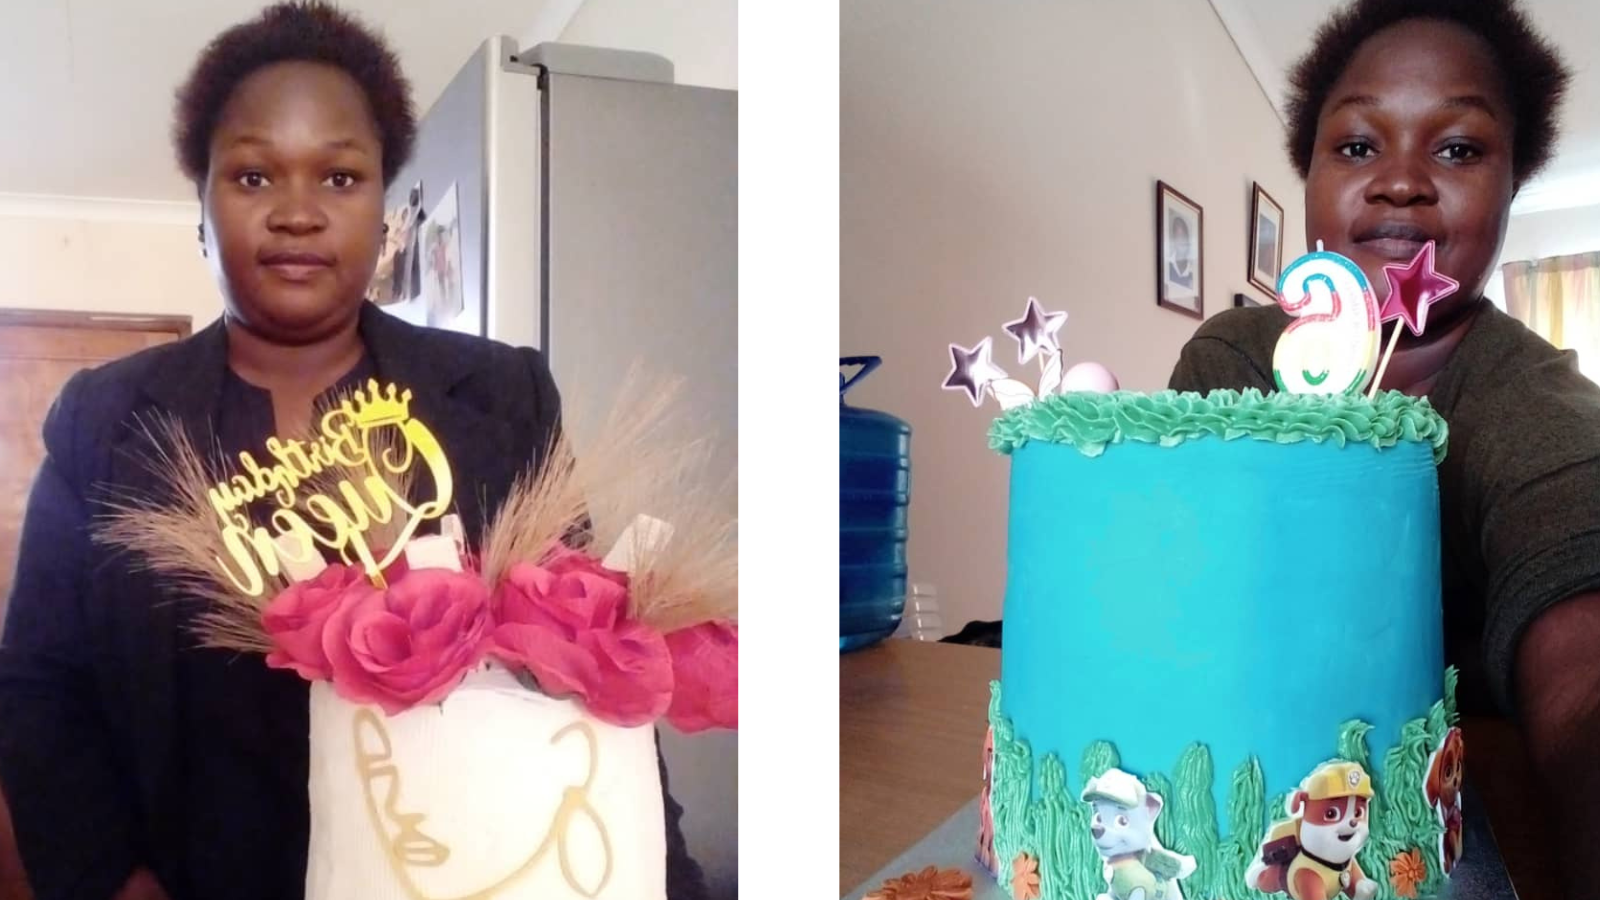 One of the positive results of implementing the lessons she learned through the AWOME training is that Angela has expanded her business to provide baked goods and this business has garnered great demand from clients near and far. Photos courtesy of Angela Olifant